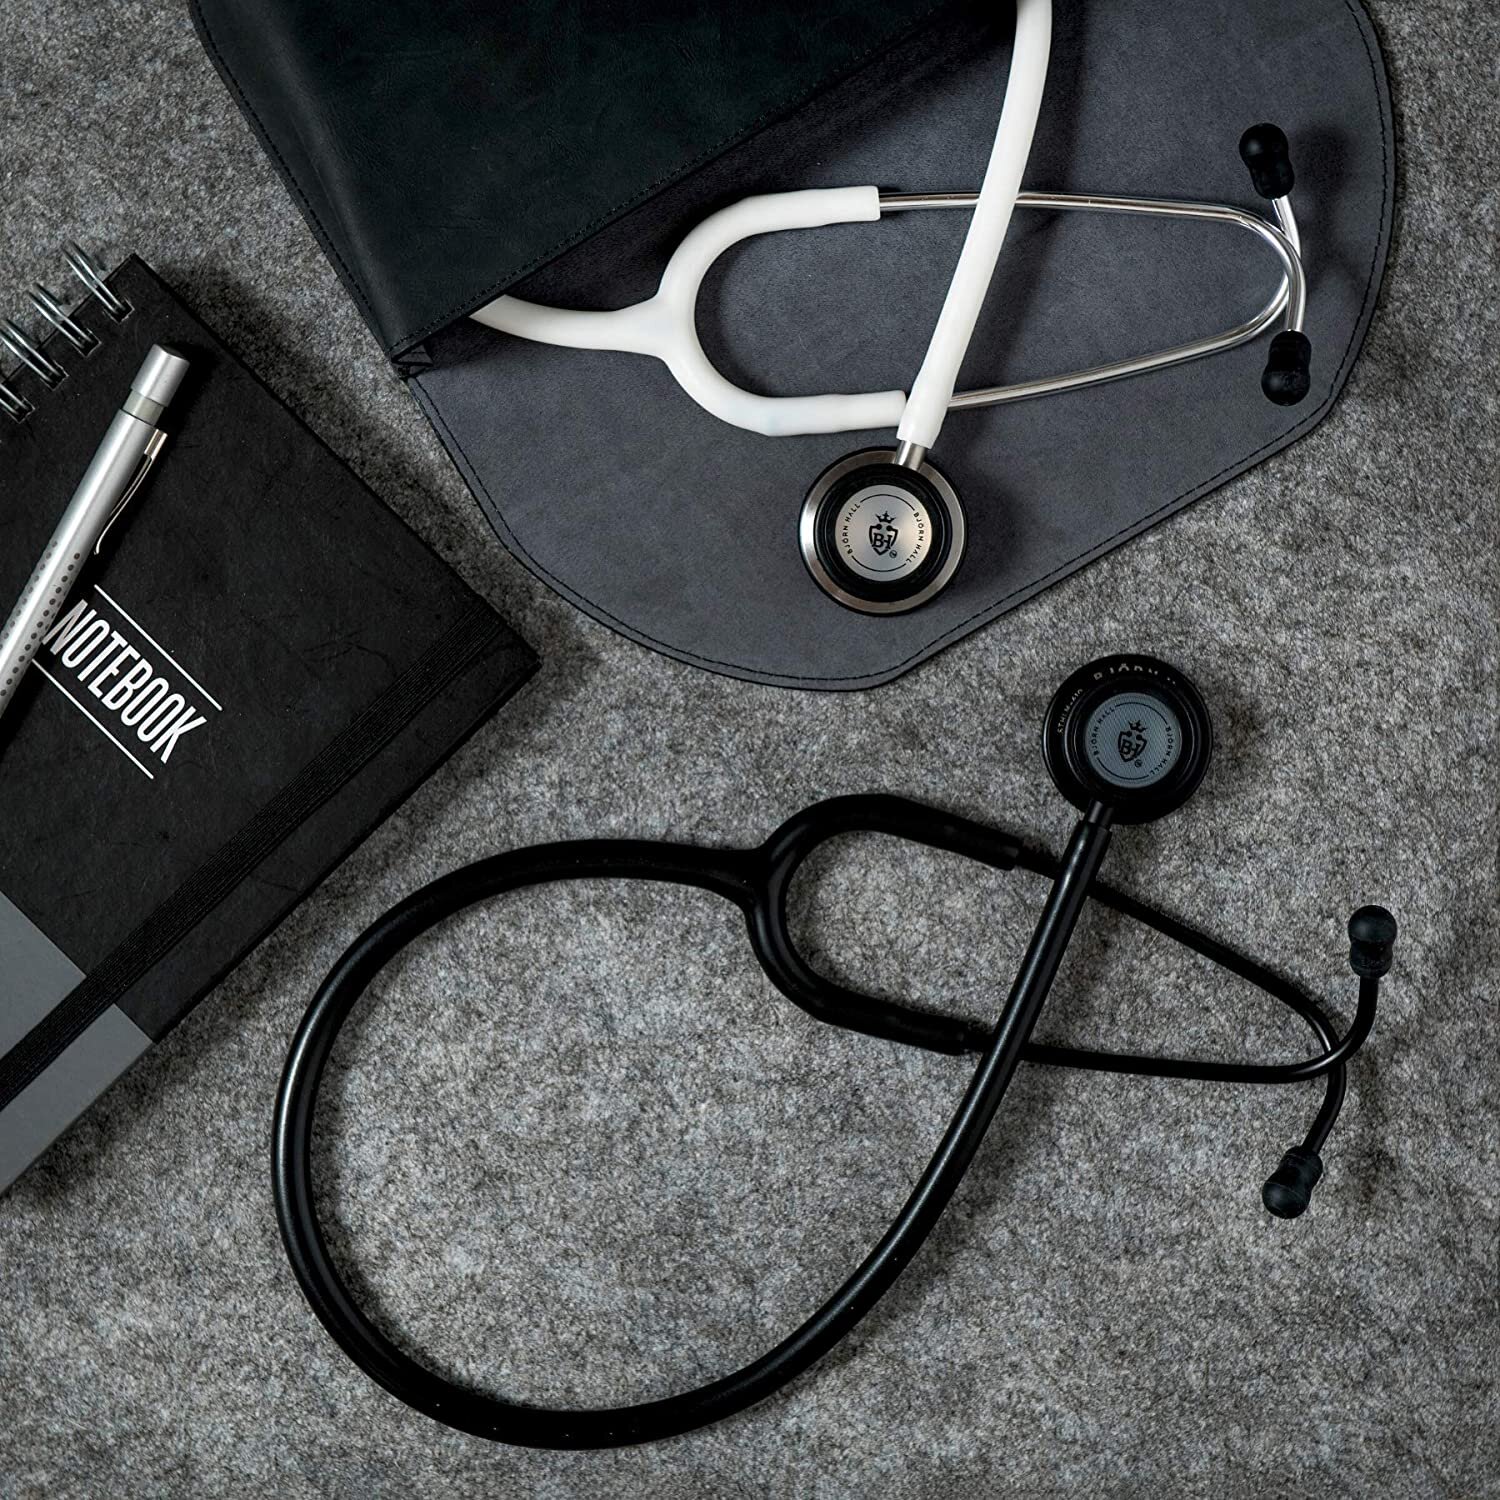 Stethoscope Cleaning Standards May Not Eliminate Bacterial Contamination -  Medical Bag